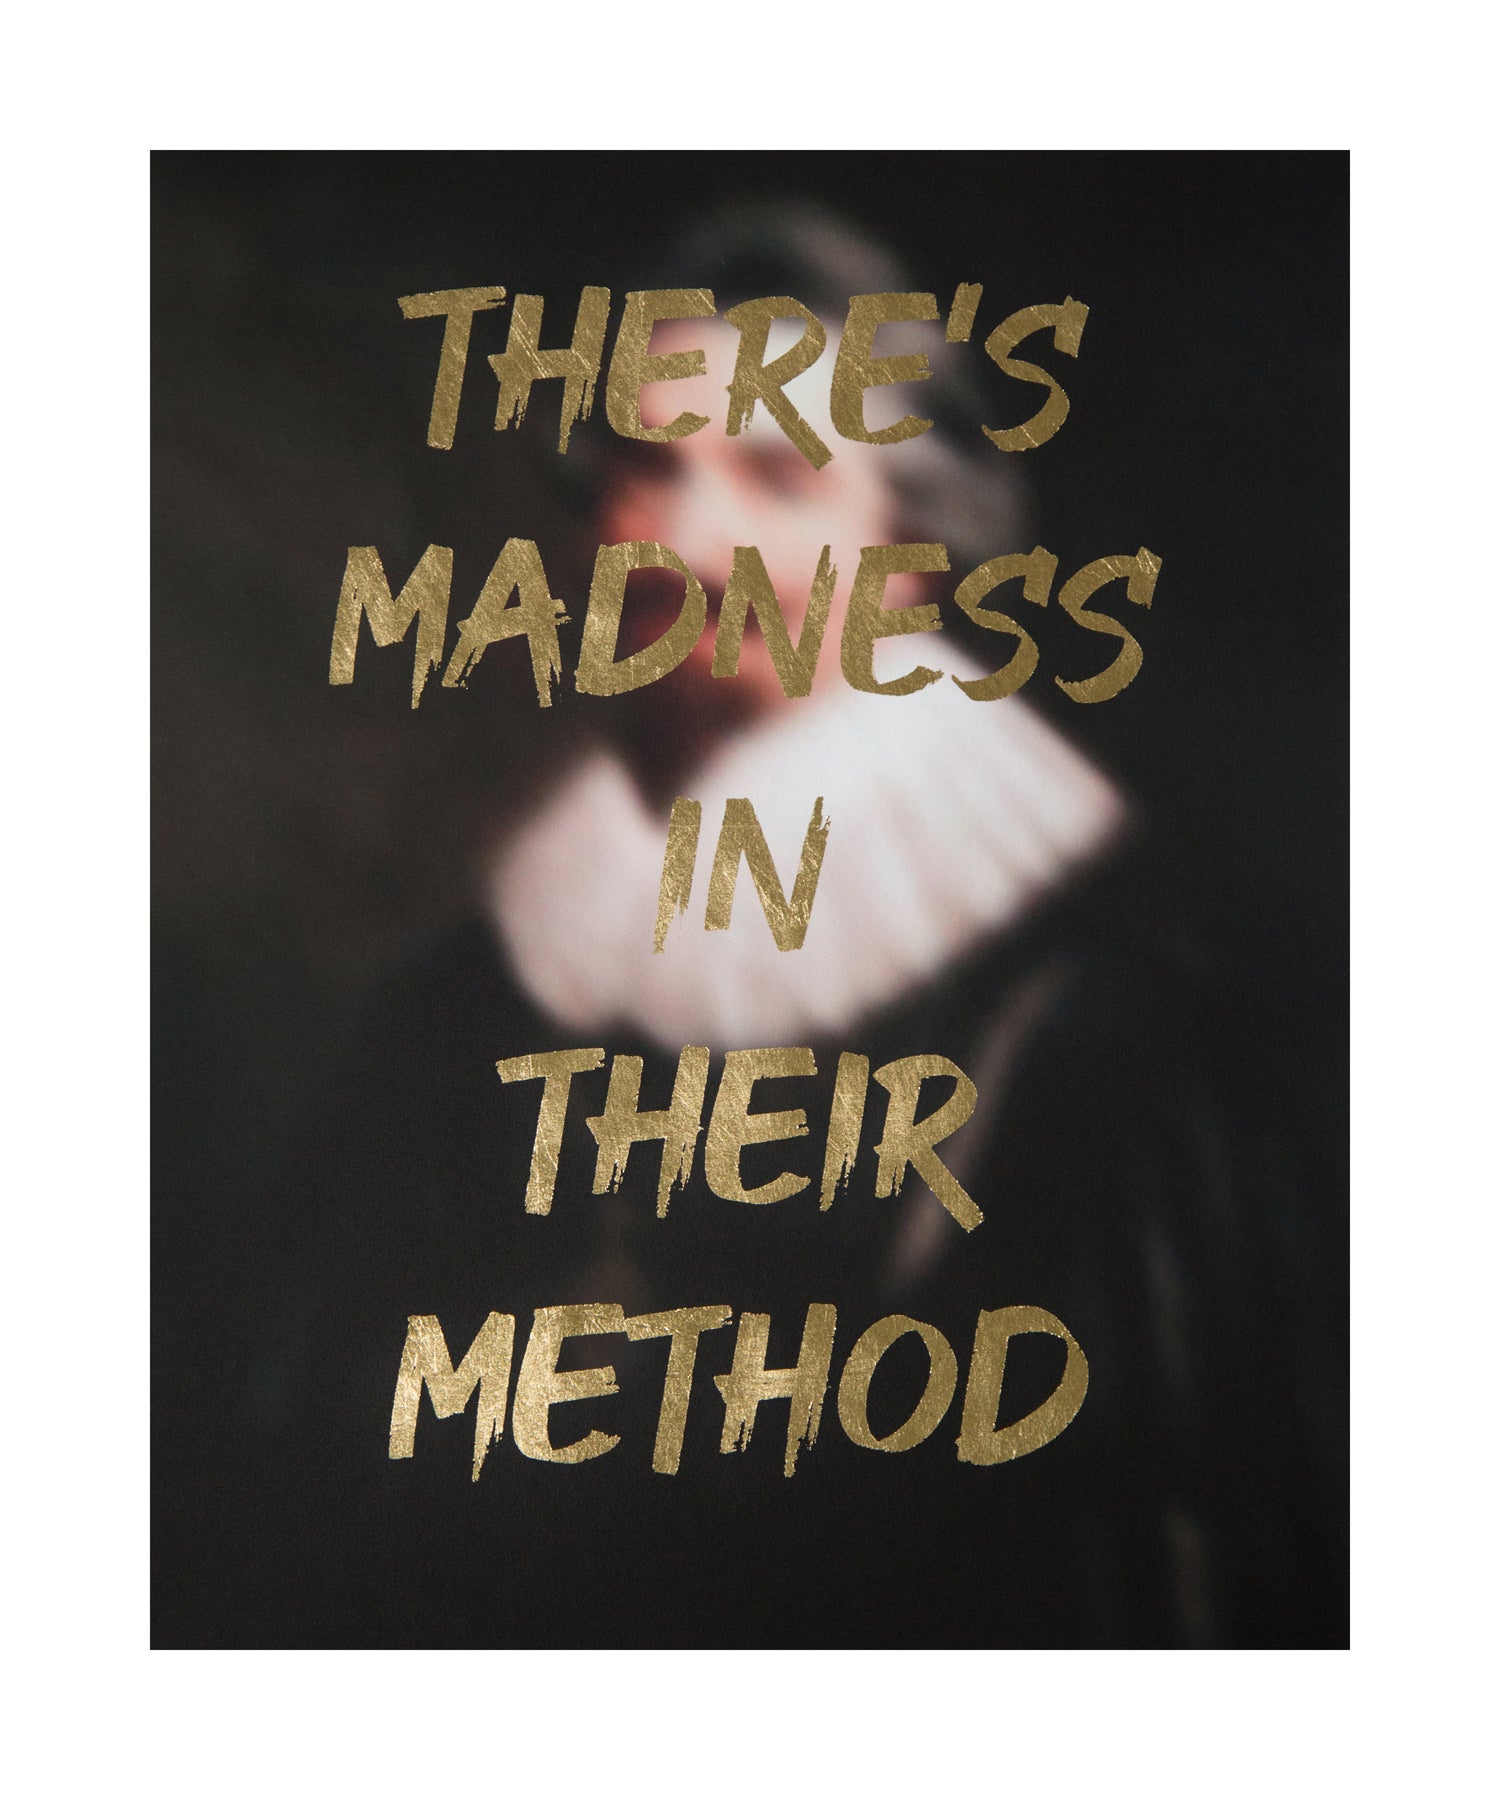 "THERE'S MADNESS IN THEIR METHOD" Limited Edition Hand Finished Print By AA Watson